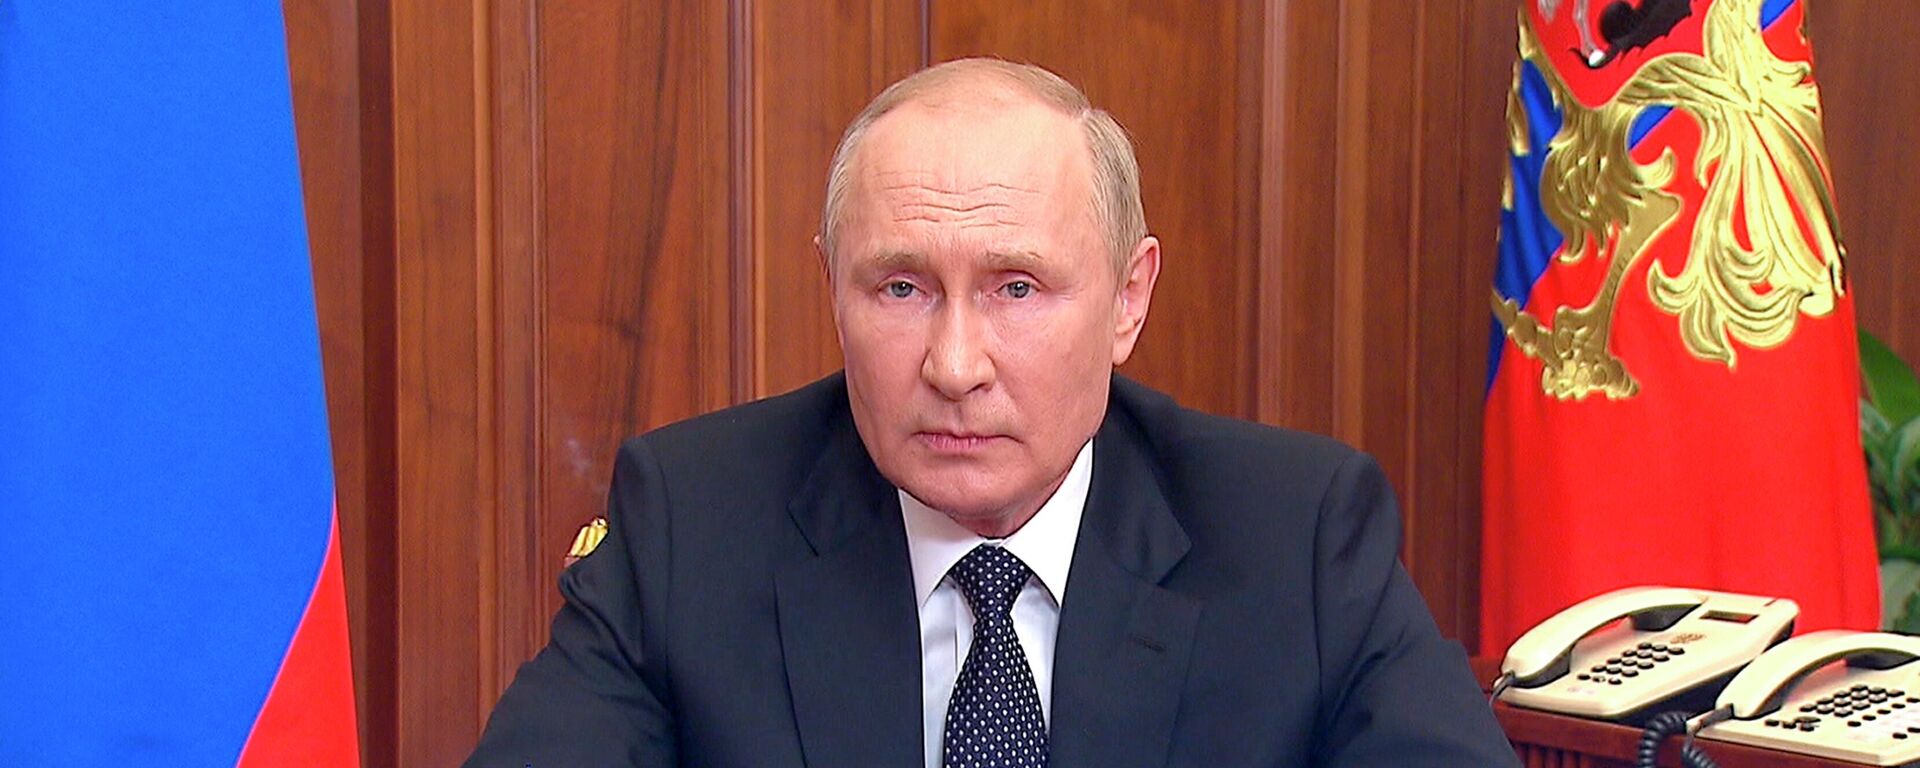 In this image released by the Russian Presidential Press Service, Russian President Vladimir Putin addresses the nation in Moscow, Russia, Wednesday, Sept. 21, 2022 - Sputnik International, 1920, 21.09.2022